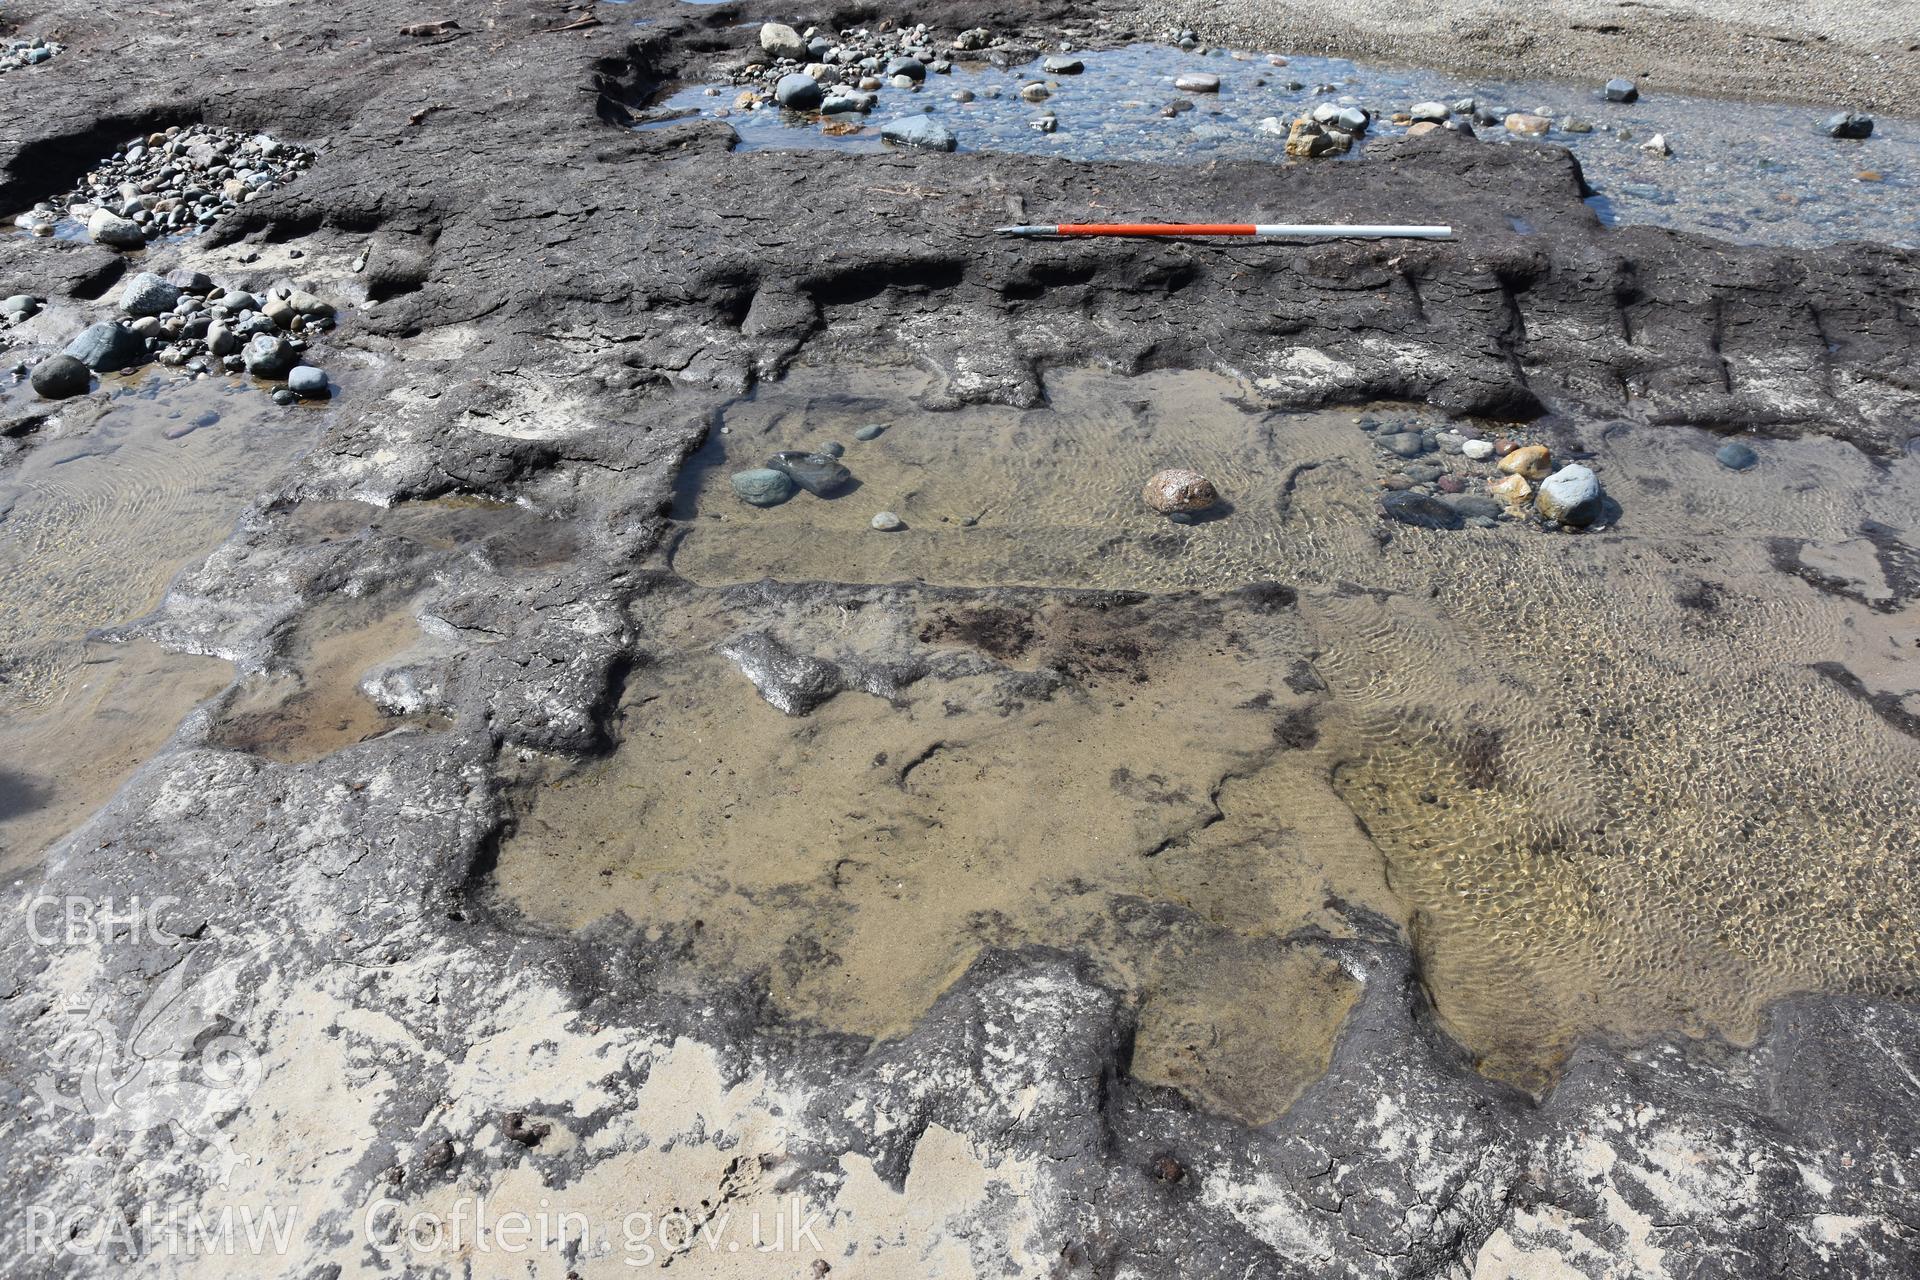 Photography of medieval or post-medieval peat cuttings preserved in the eastern part of the peats on The Warren beach, Abersoch. Recorded with GNSS and photogrammetry for the CHERISH Project. ? Crown: CHERISH PROJECT 2018. Produced with EU funds through the Ireland Wales Co-operation Programme 2014-2020. All material made freely available through the Open Government Licence.